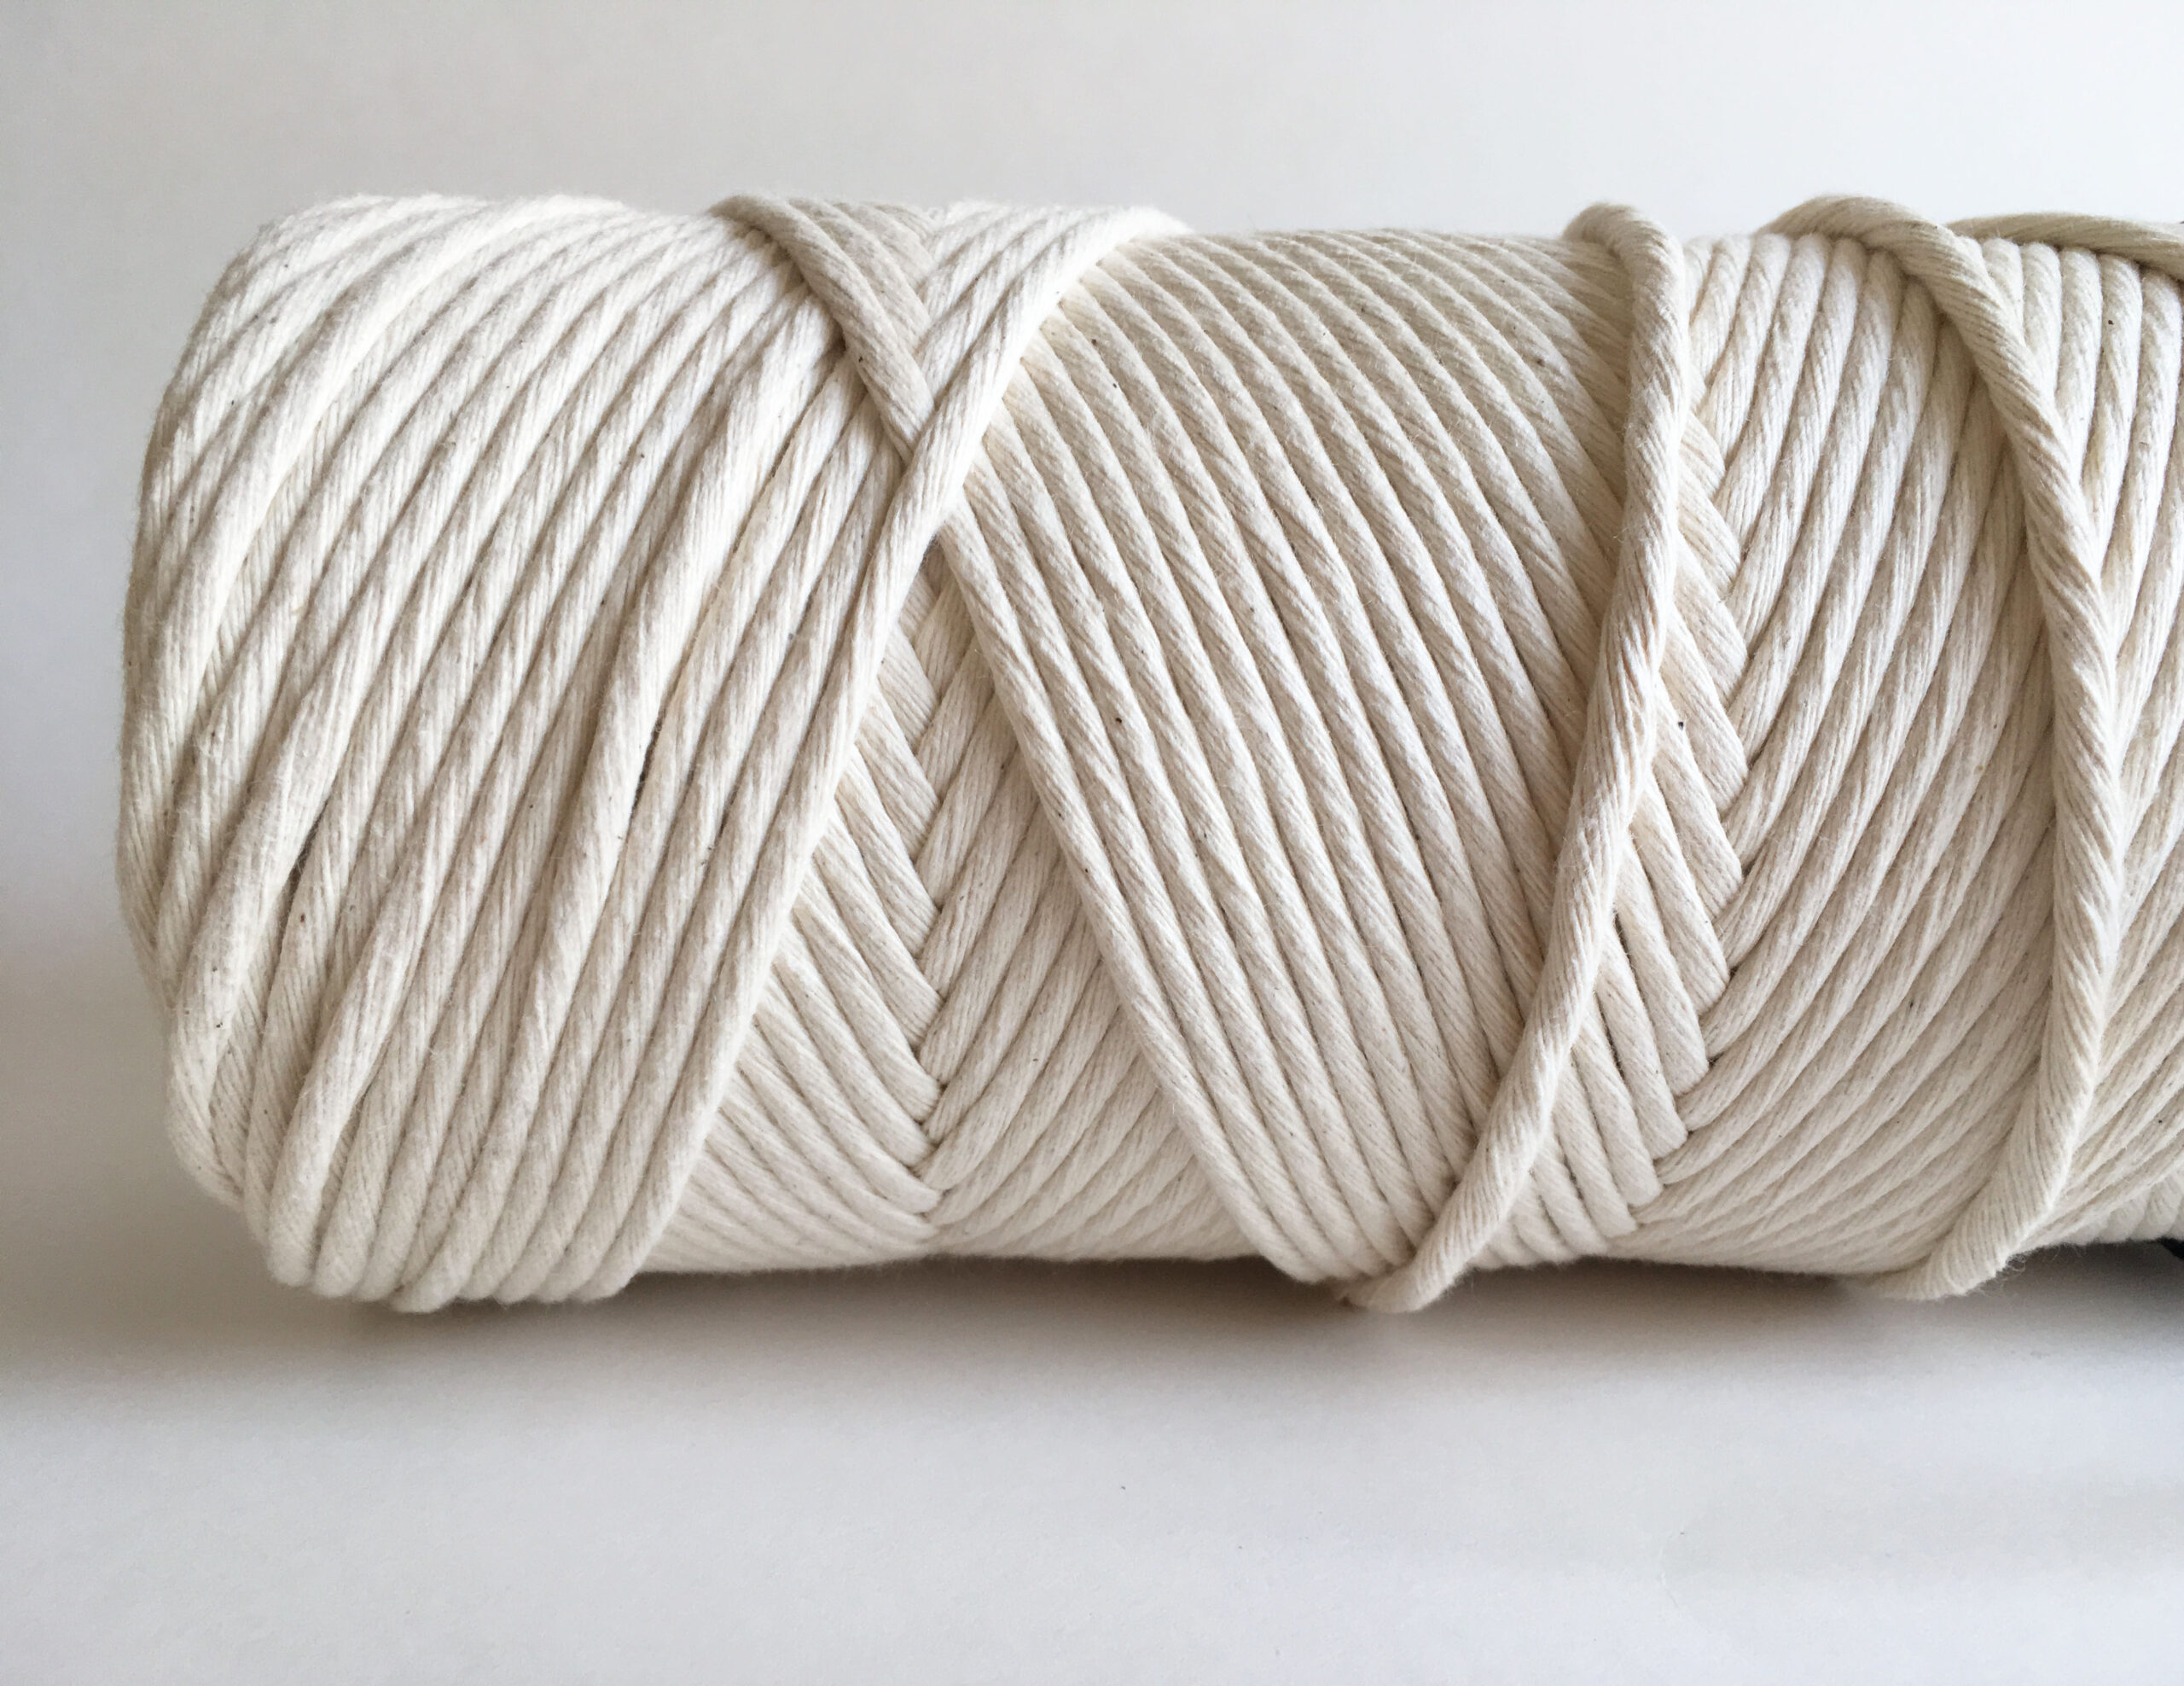 Knot & Rope Supply Ltd 6mm Single Strand Cotton Rope | Pure White x 600 Spool | Available in a variety of colors 